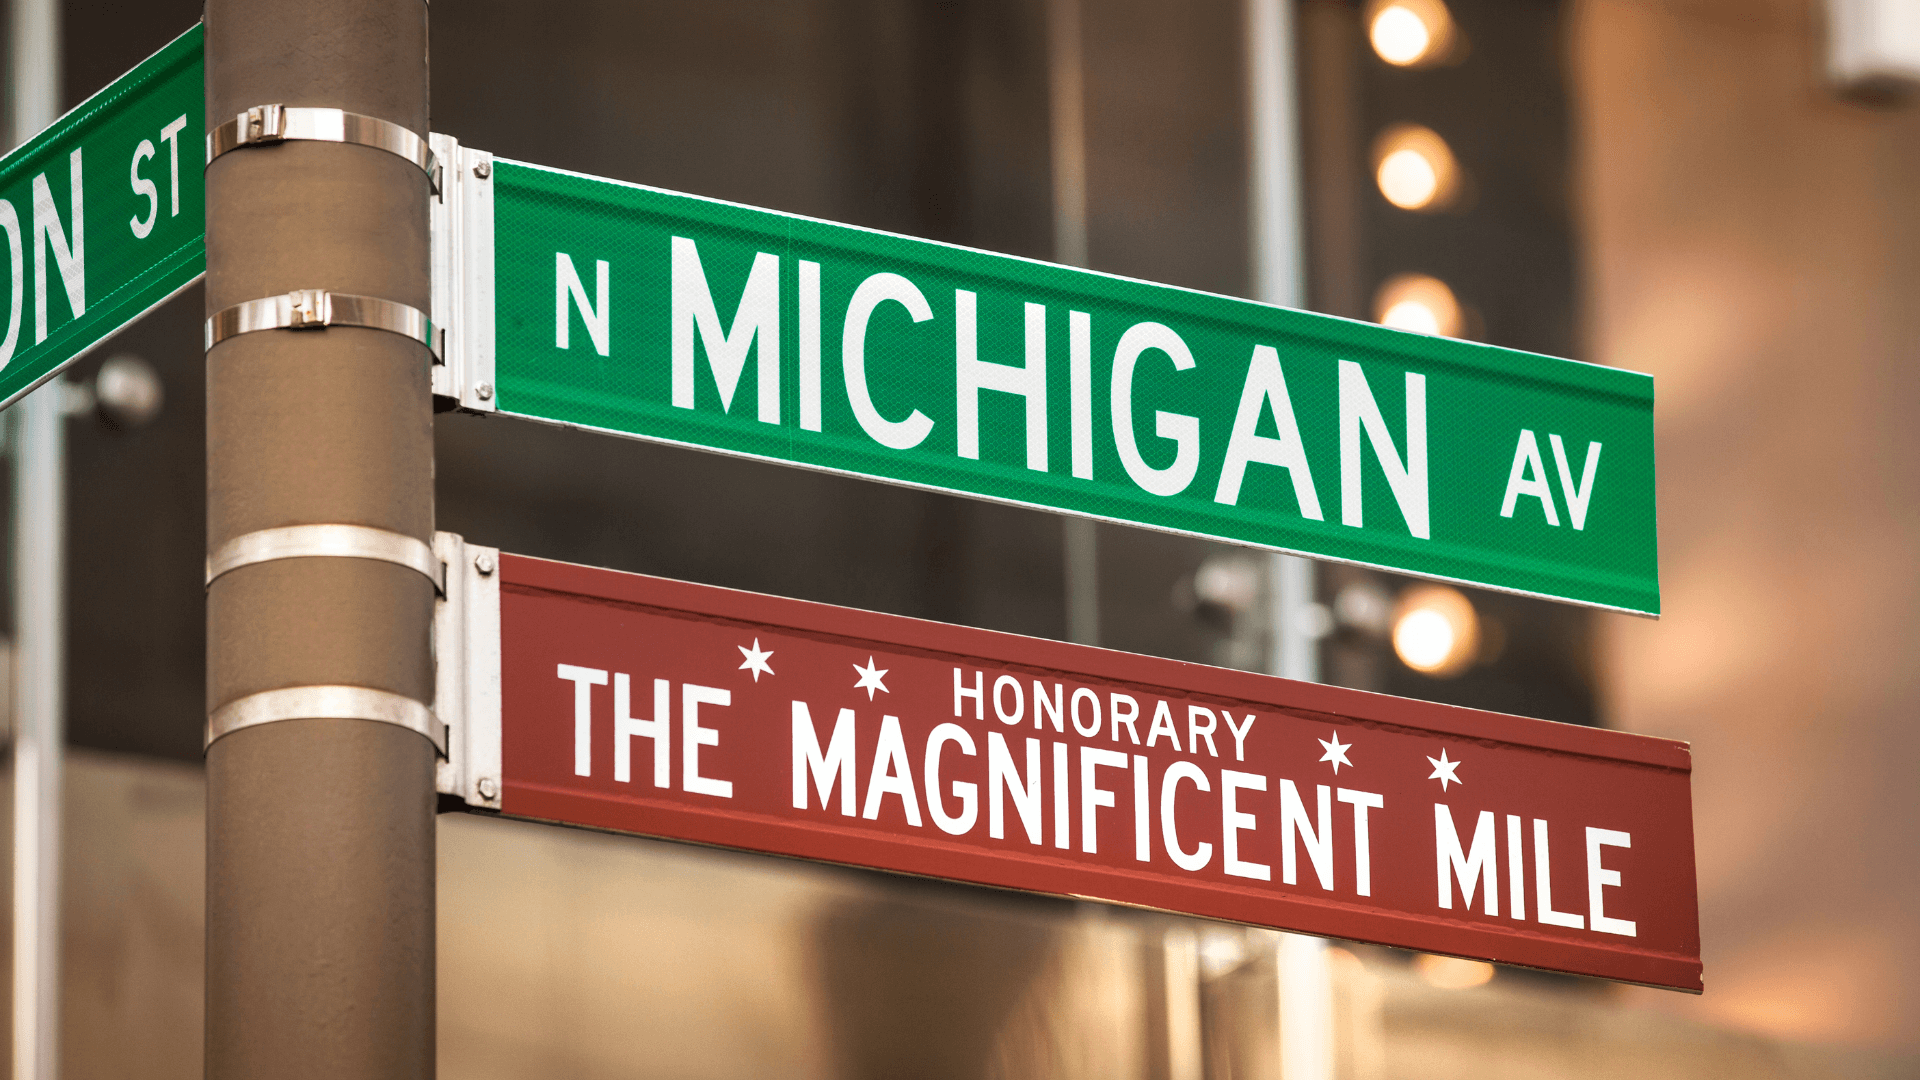 a street sign for Michigan Ave and The Magnificent Mile.